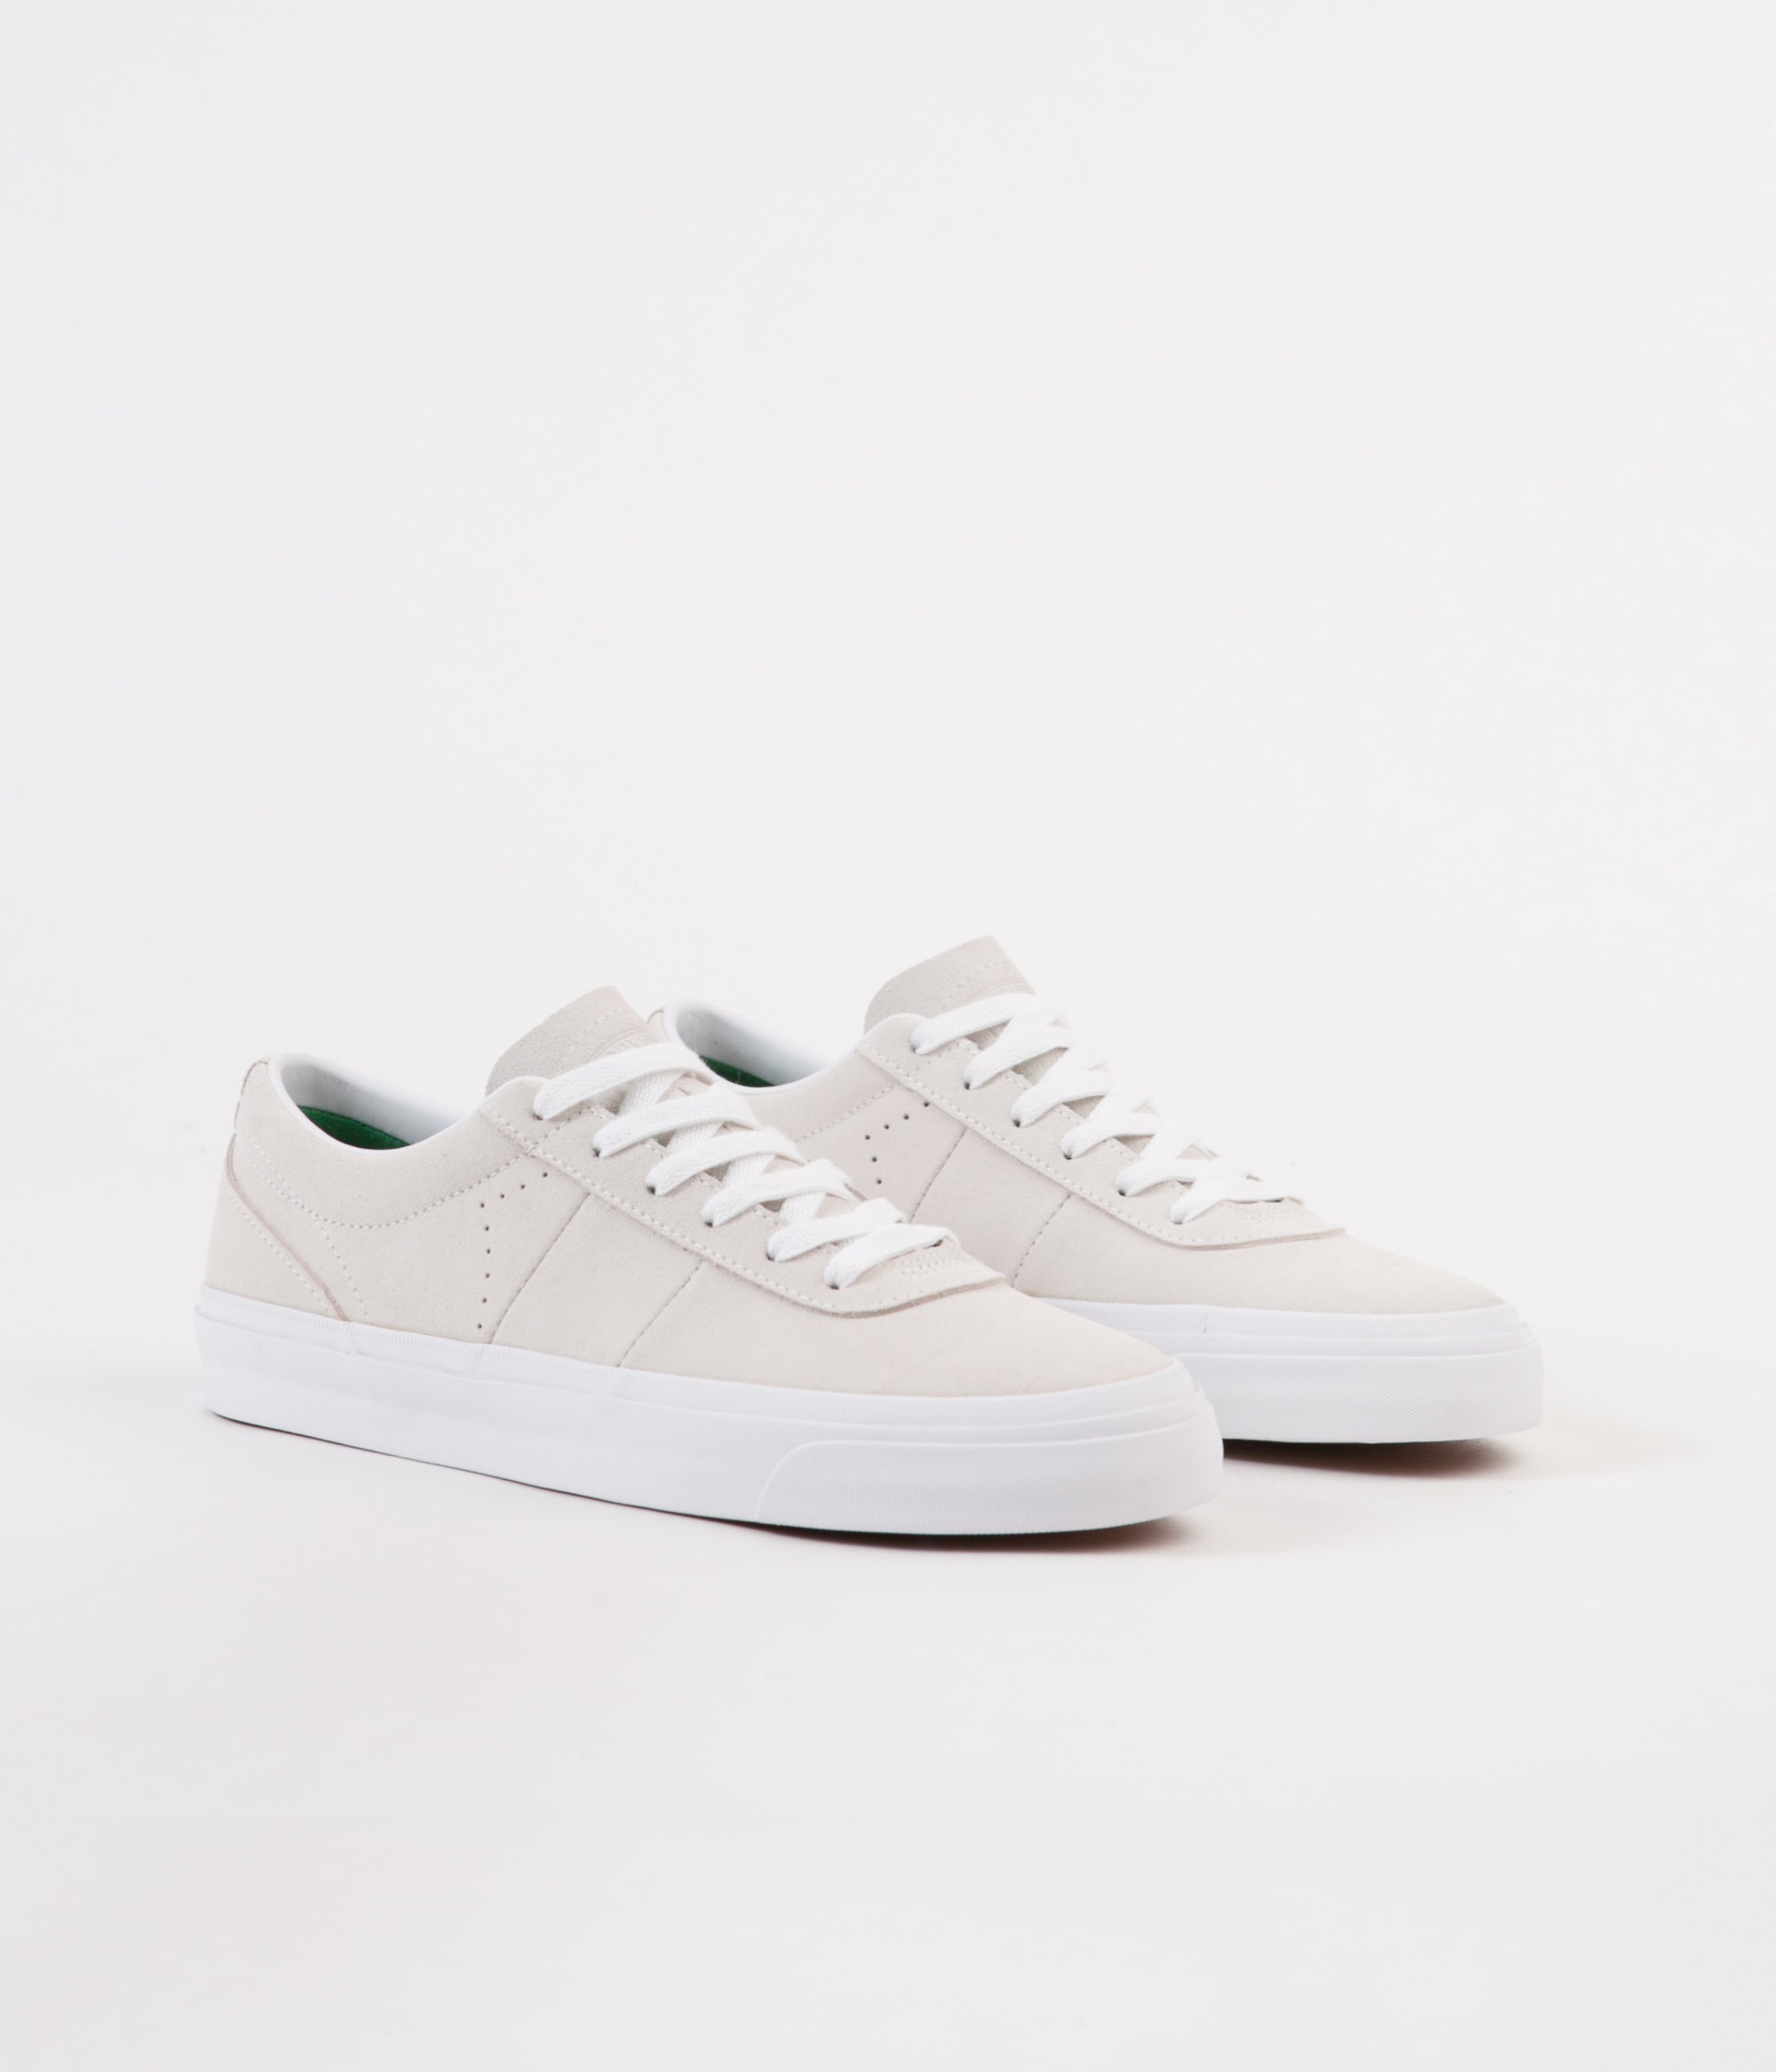 converse one star white green